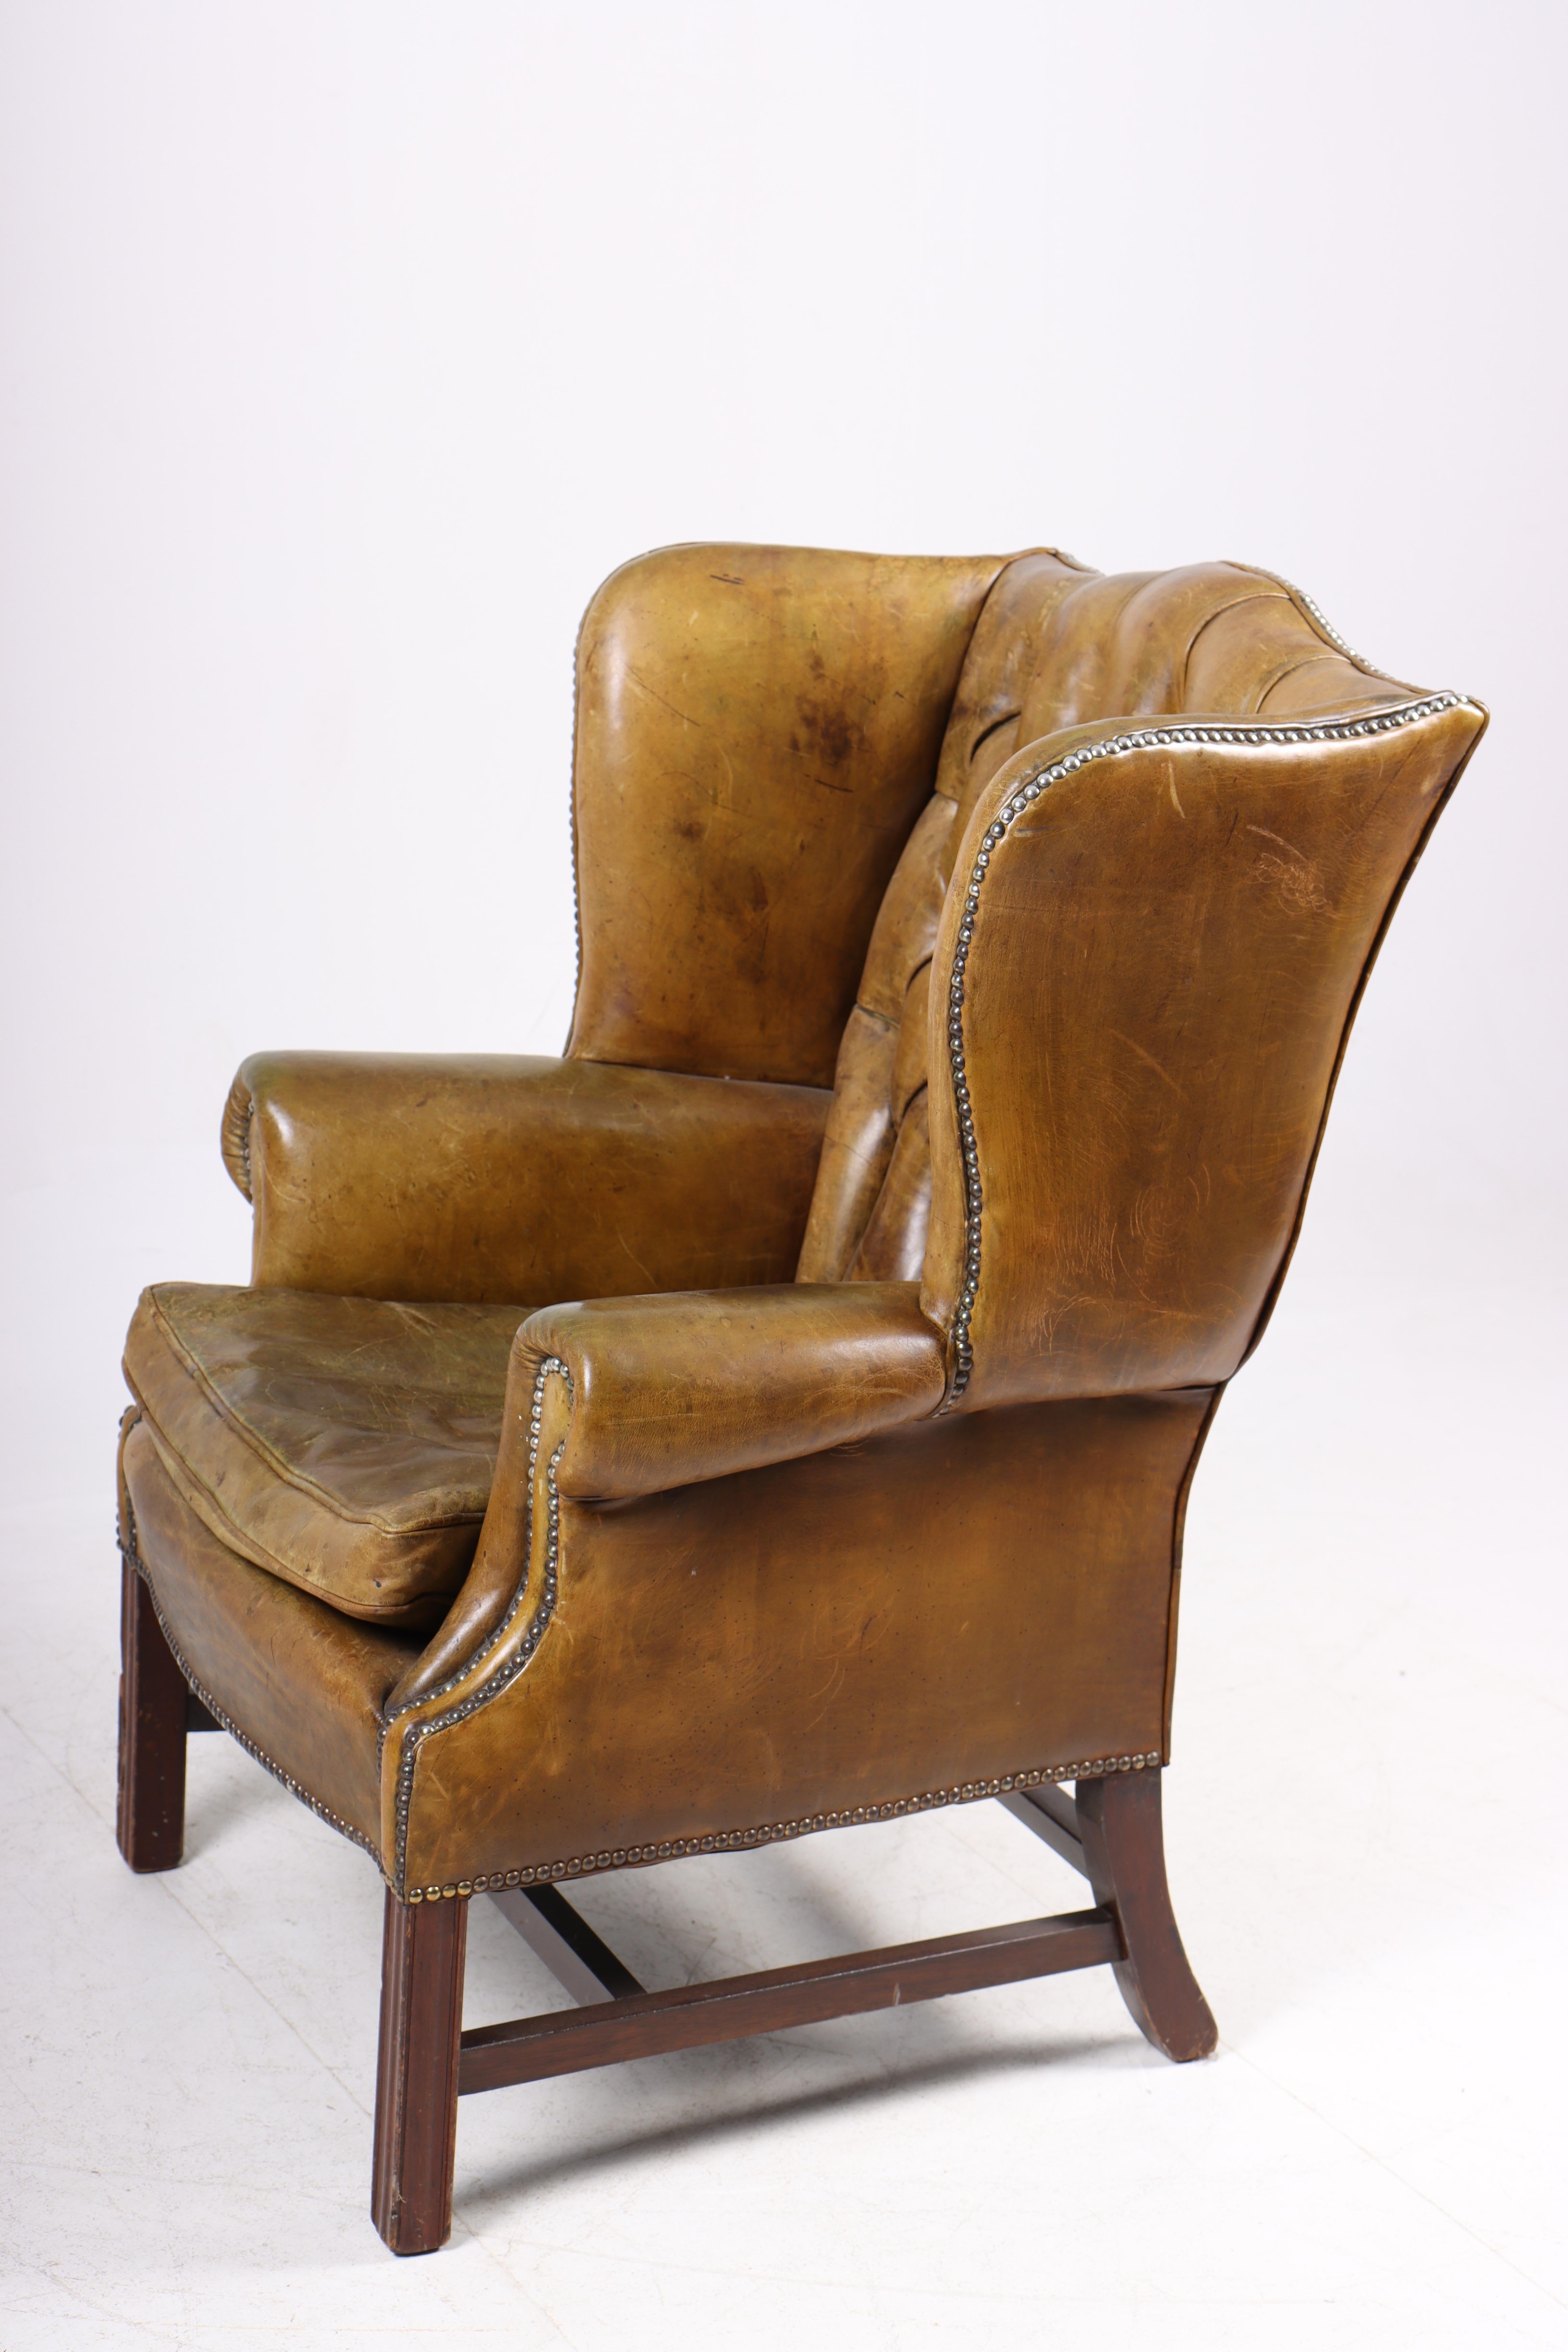 Chesterfield Wingback Chair in Leather, Made in Denmark 1950s For Sale 1